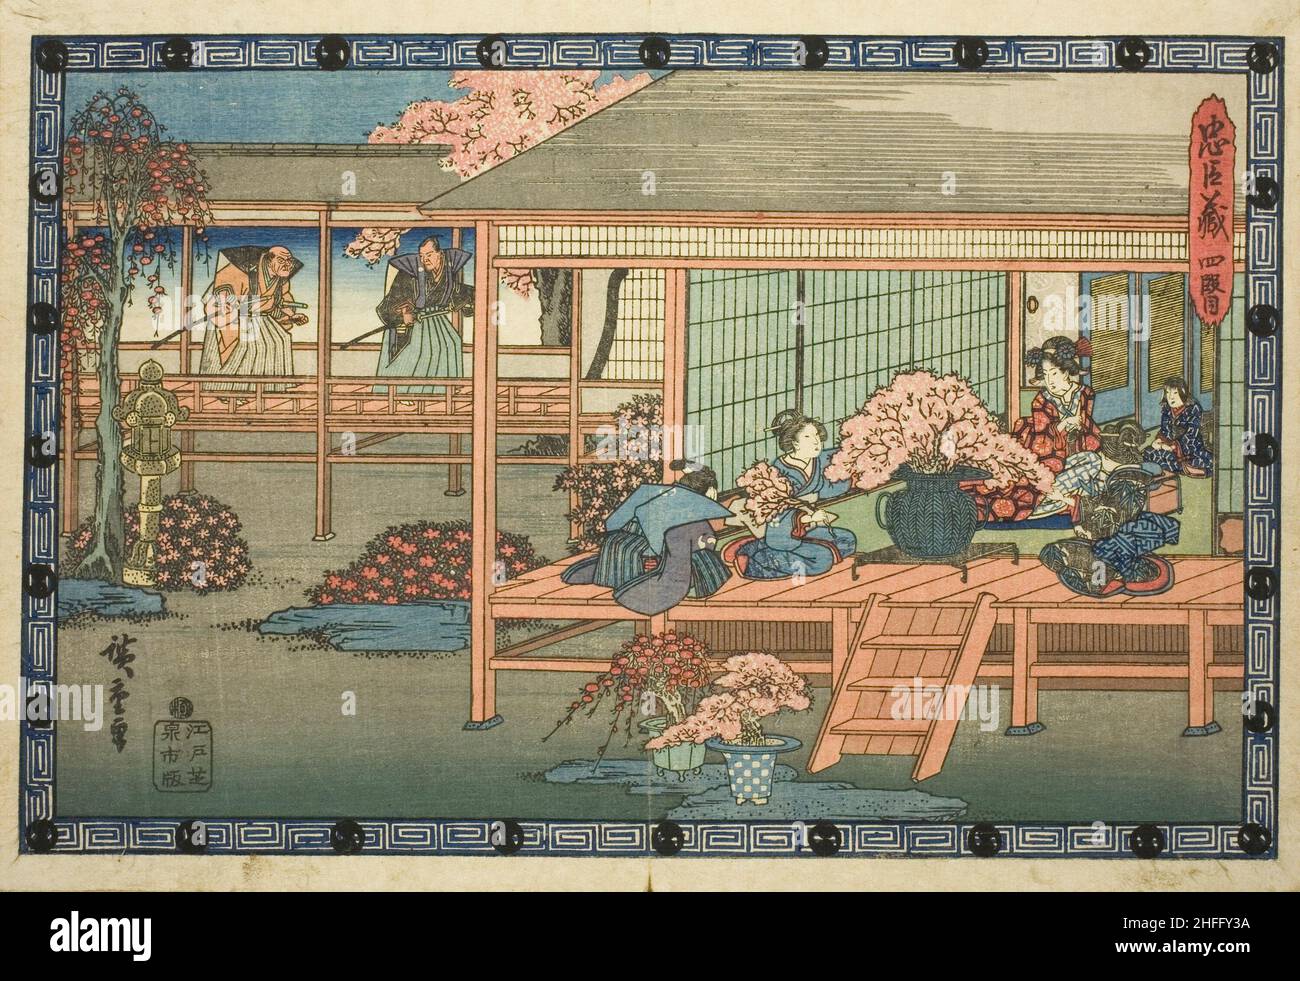 Act 4 (Yondanme), from the series &quot;The Revenge of the Loyal Retainers (Chushingura)&quot;, c. 1834/39. Asano's wife sits with attendant maids and Rikiya while arranging cherry blossoms. Arriving in the background are deputies, including Honzo, from the court to notify Lord Asano that he been condemned to commit seppuku as punishment for his knife attack in court on Lord Kira. Stock Photo